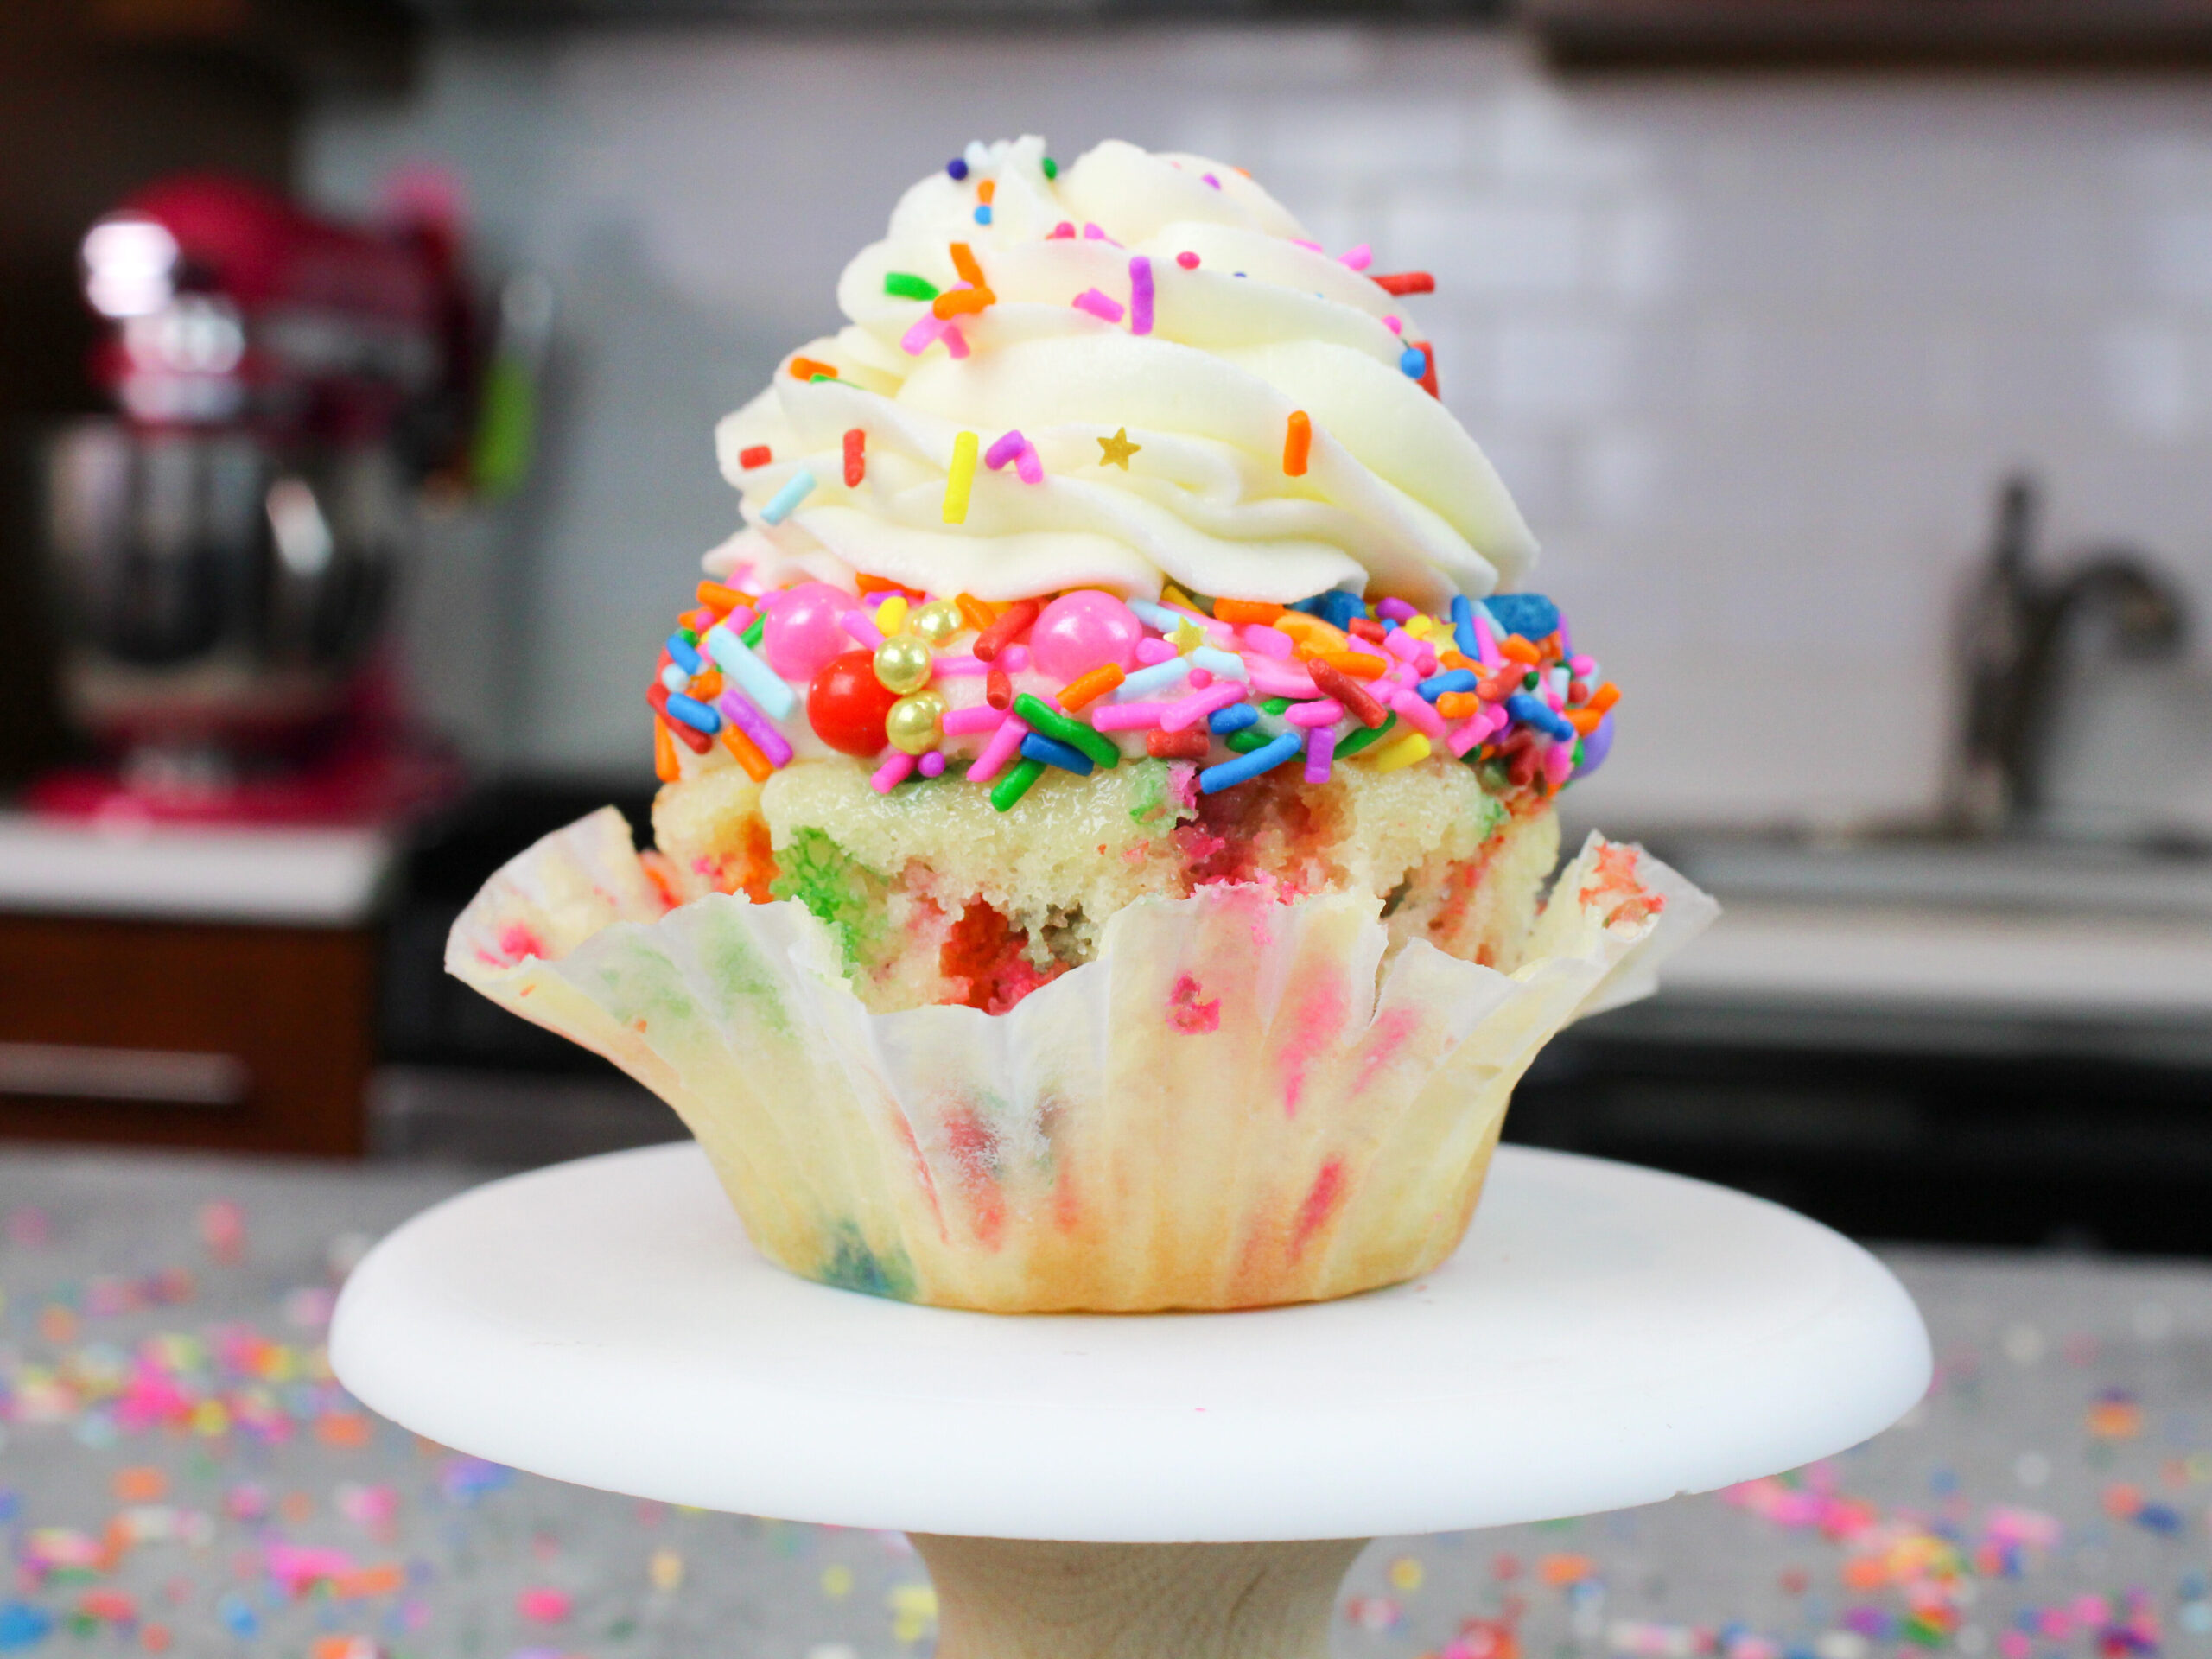 image of a cupcake that was made using a funfetti cupcake recipe and that has been decorated with cute sprinkles